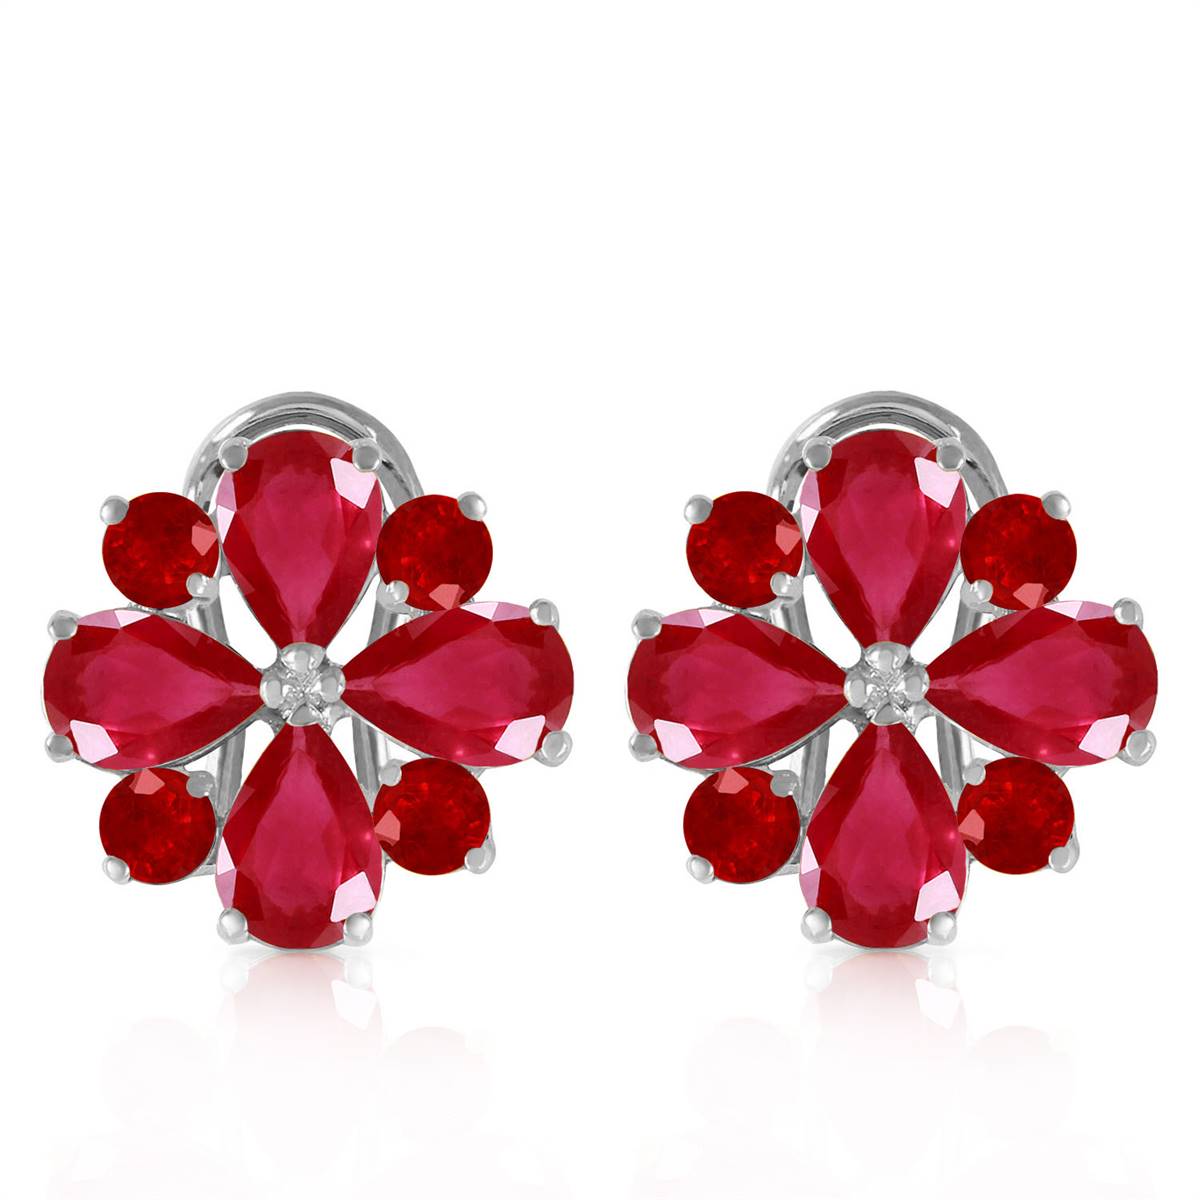 4.85 Carat 14K Solid White Gold French Clips Earrings Natural Ruby